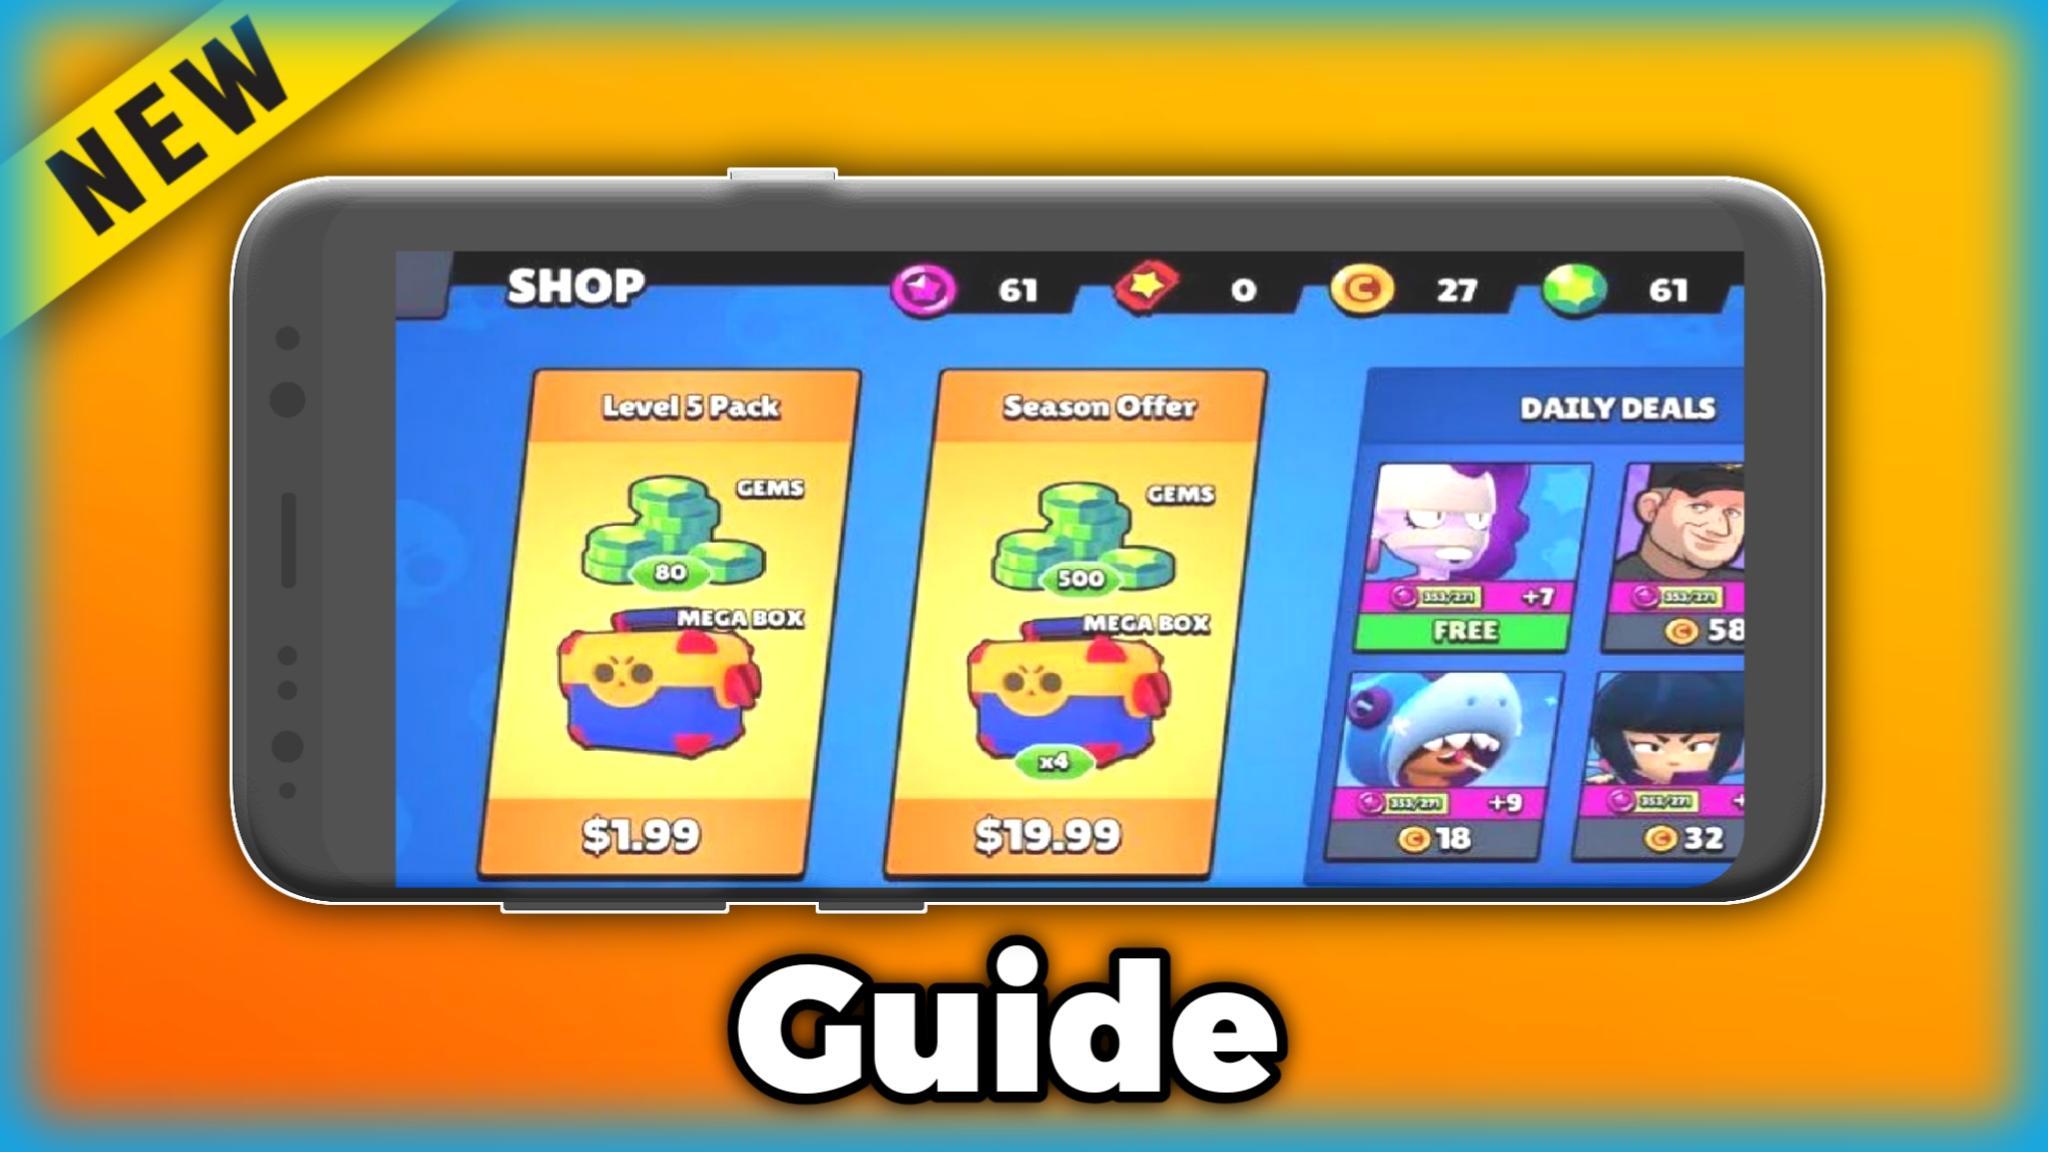 Guide For Brawl Stars Mortis 2020 For Android Apk Download - 2048x1152 banner para youtube brawl stars